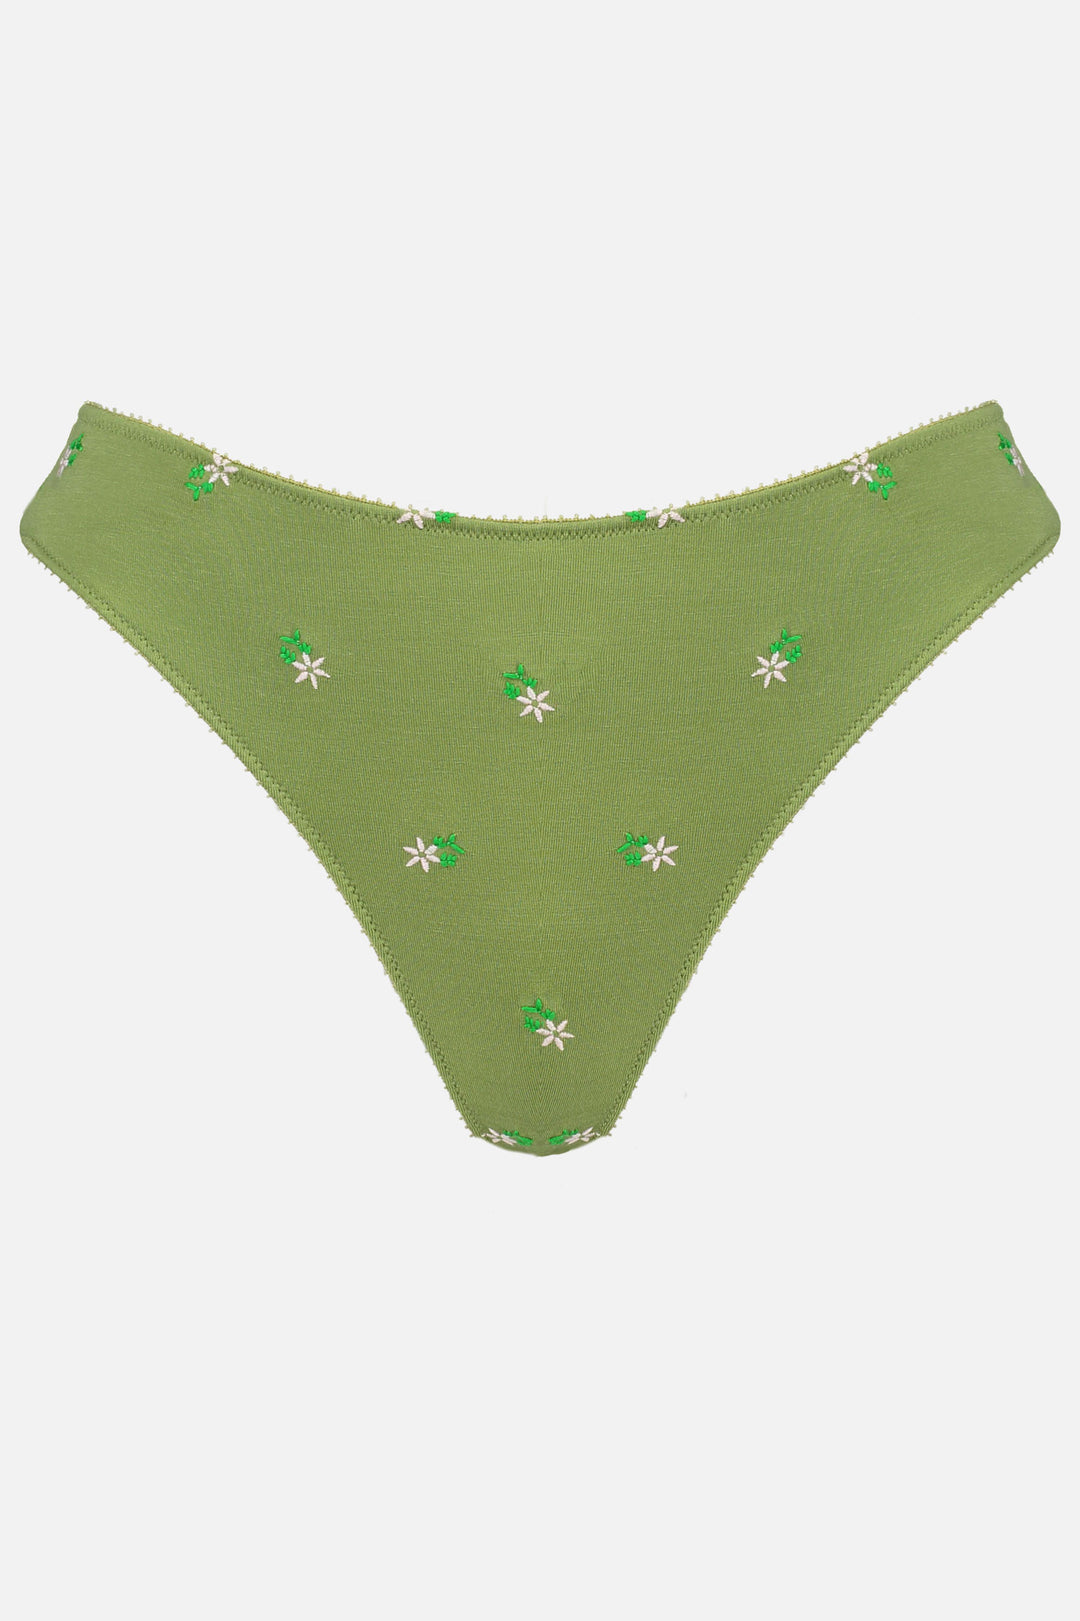 Videris Lingerie bikini knicker in olive embroidered TENCEL™ a mid-rise style cut to follow the natural curve of your hips